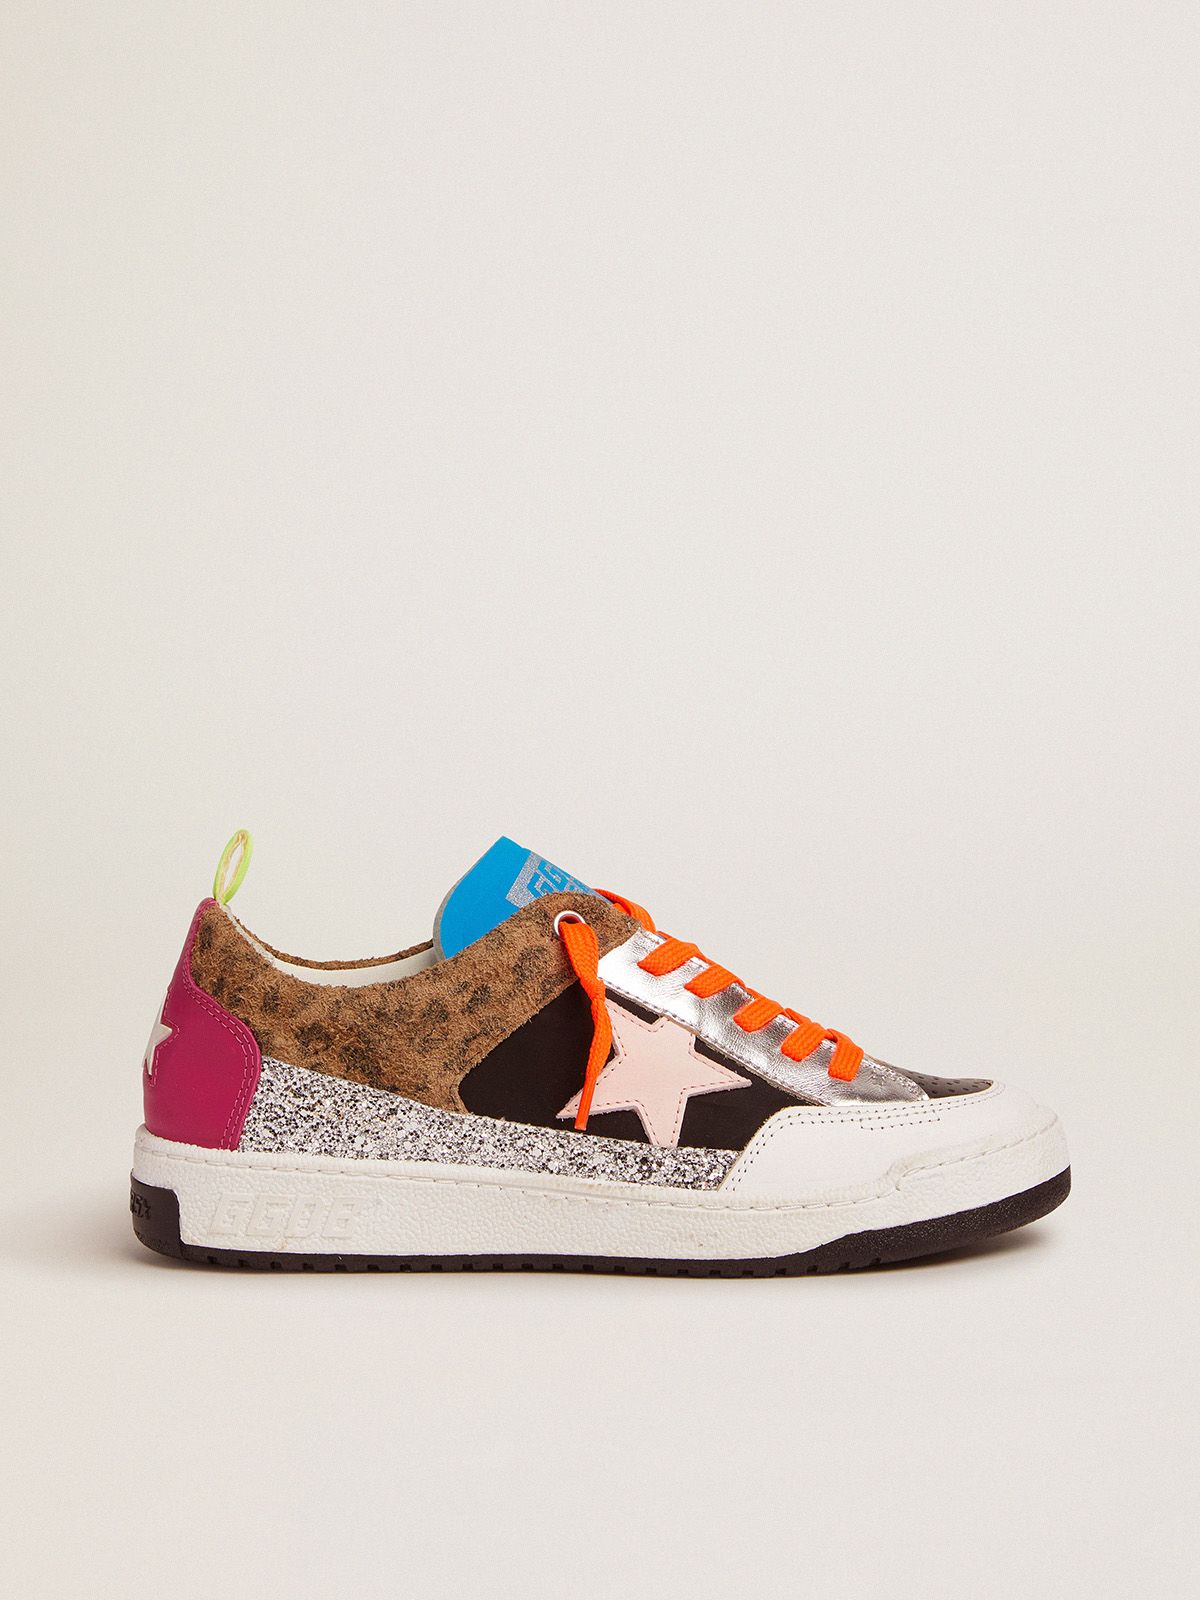 golden goose patchwork animal-print with leather glitter, sneakers Yeah silver and colored